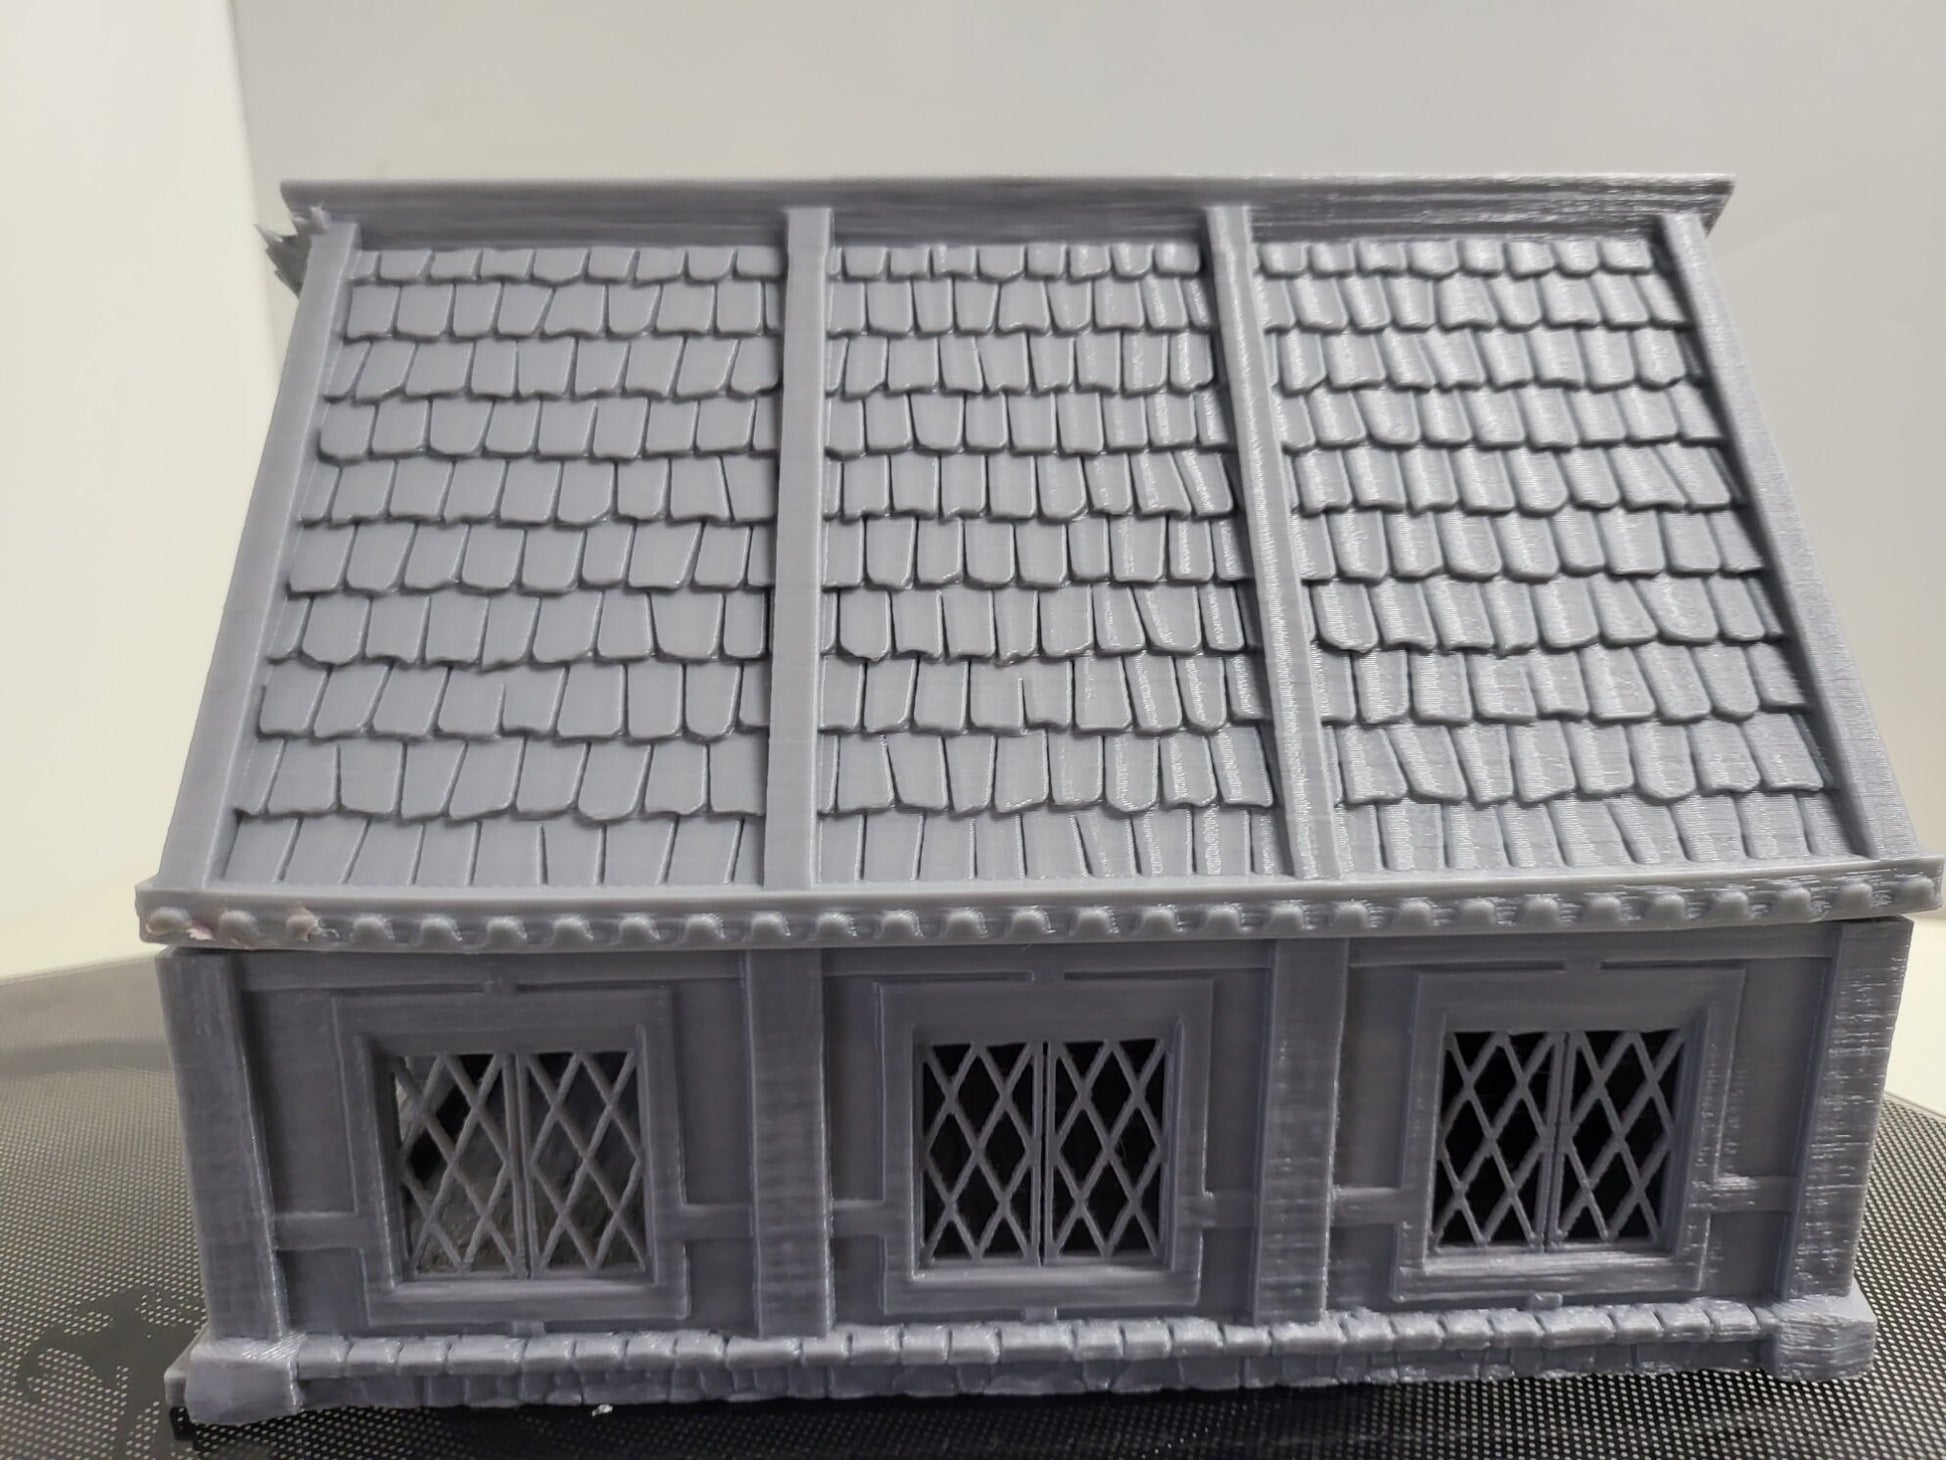 Stable, Mordheim, dungeons and Dragons, Horses, houses, Tabletop, Fantasy Terrain, Town Set, Town and Market, Mordheim Set, Wargaming, Dungeons and Dragons, Lord of the rings, RPG Set, Village Set, building set, small town, Market